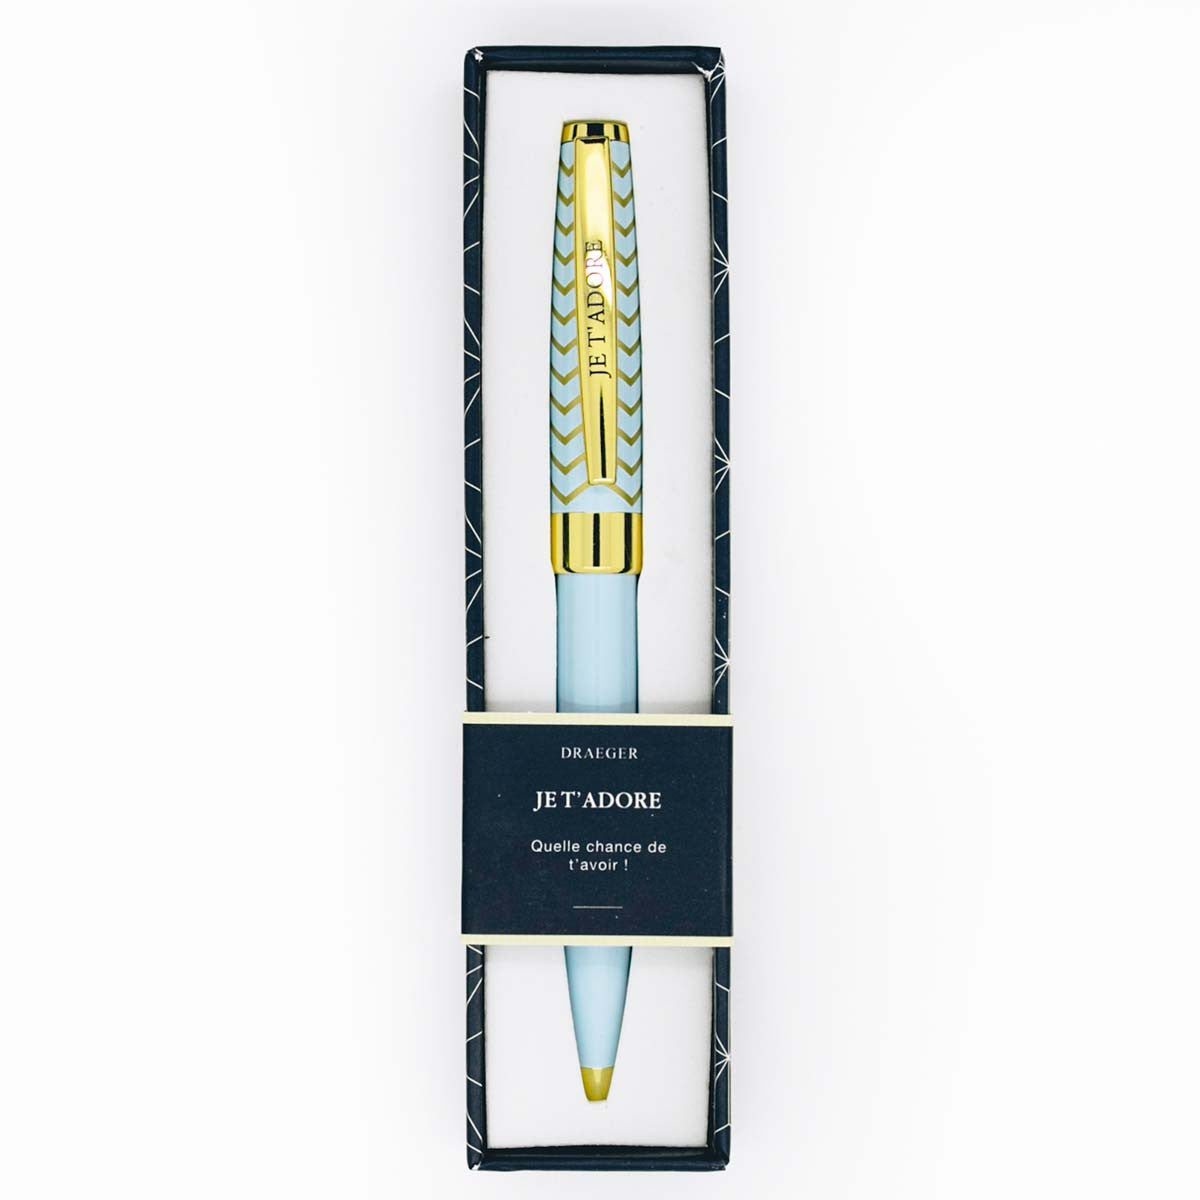 Personalized pen I adore you